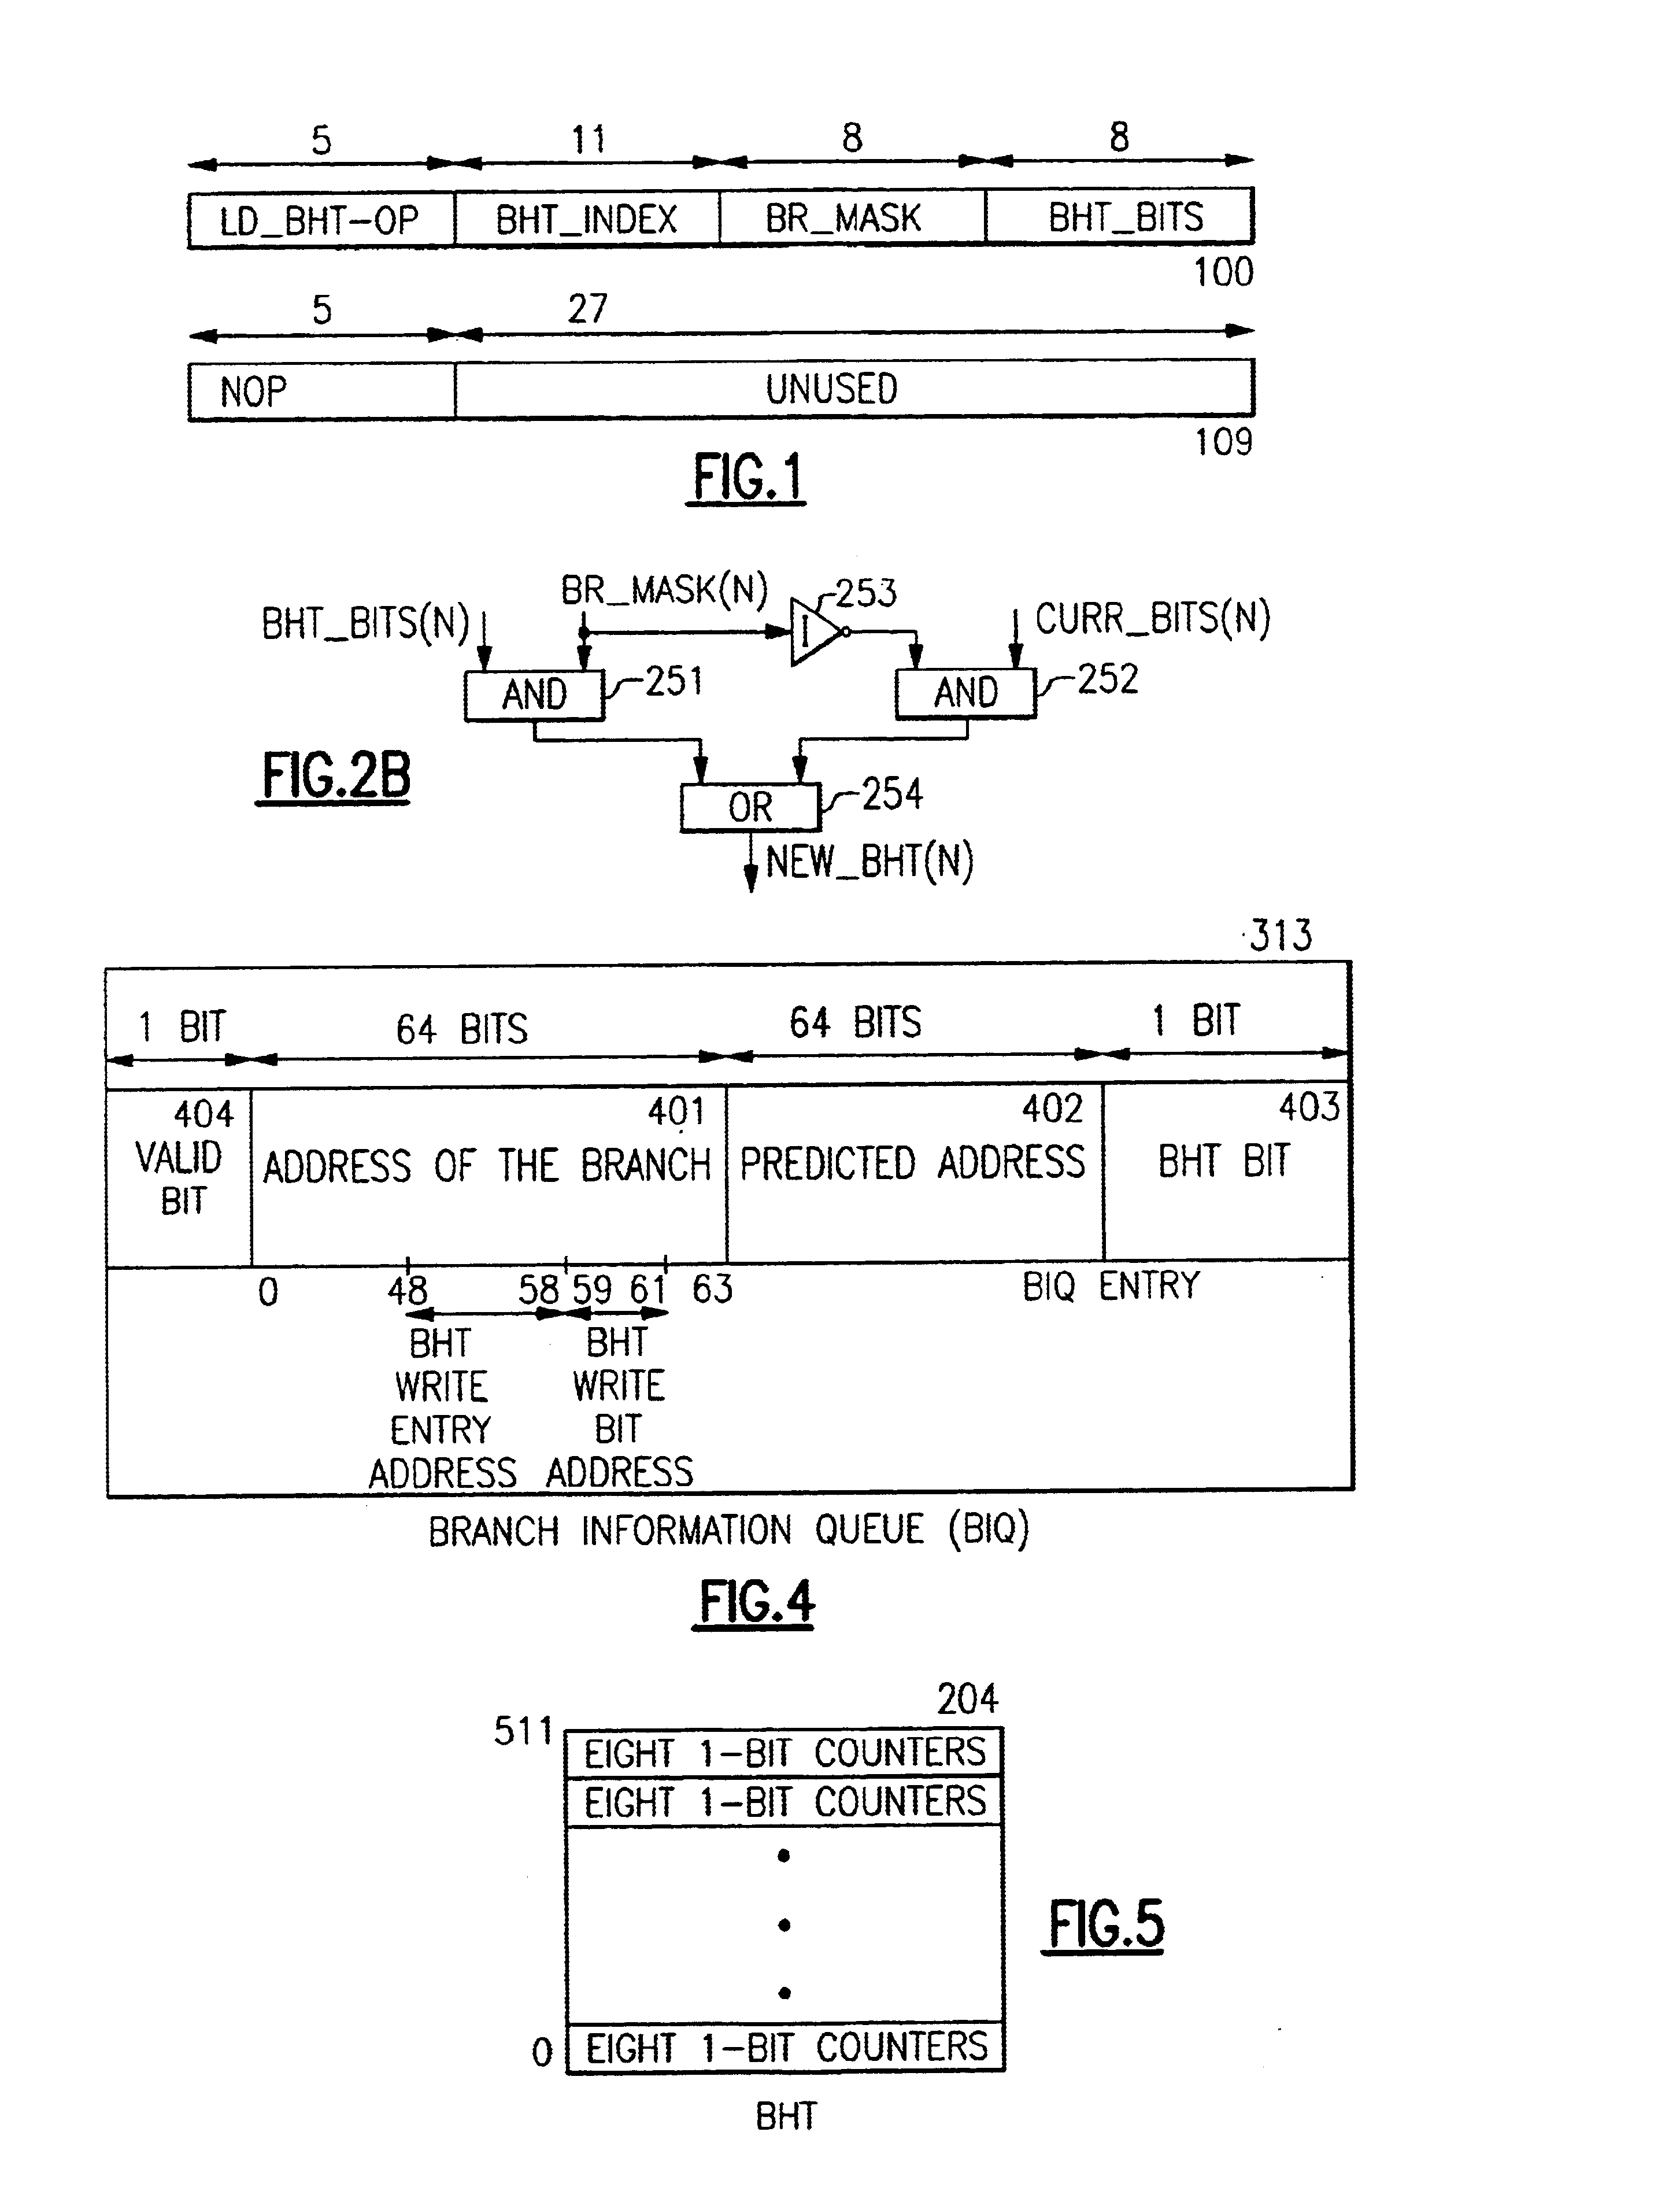 Branch prediction apparatus and process for restoring replaced branch history for use in future branch predictions for an executing program